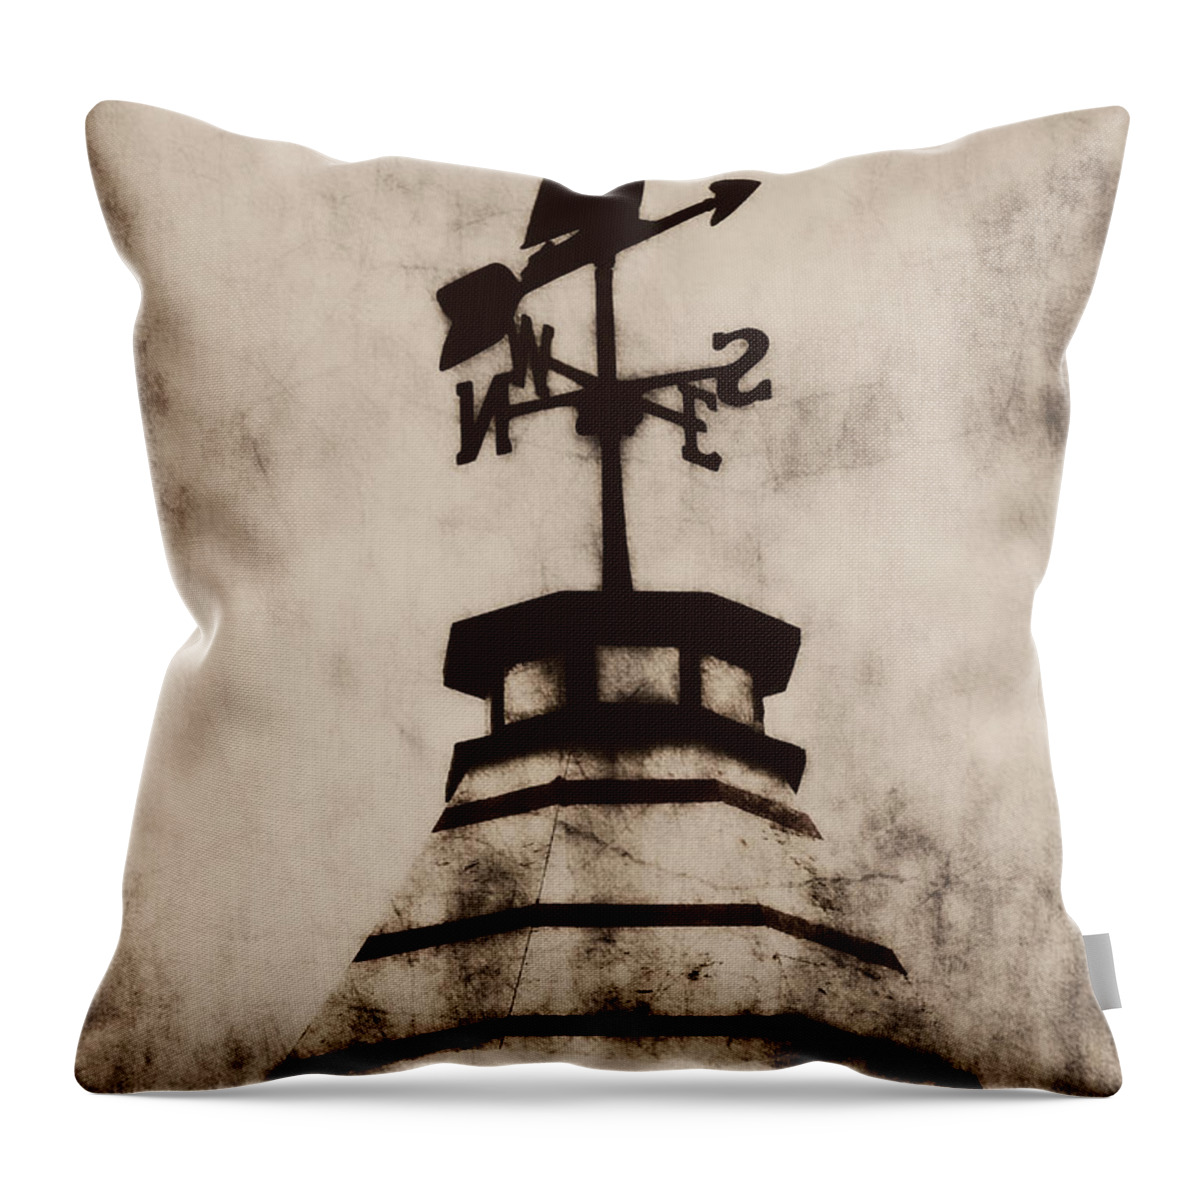 Compass Throw Pillow featuring the photograph Towards South by Zinvolle Art